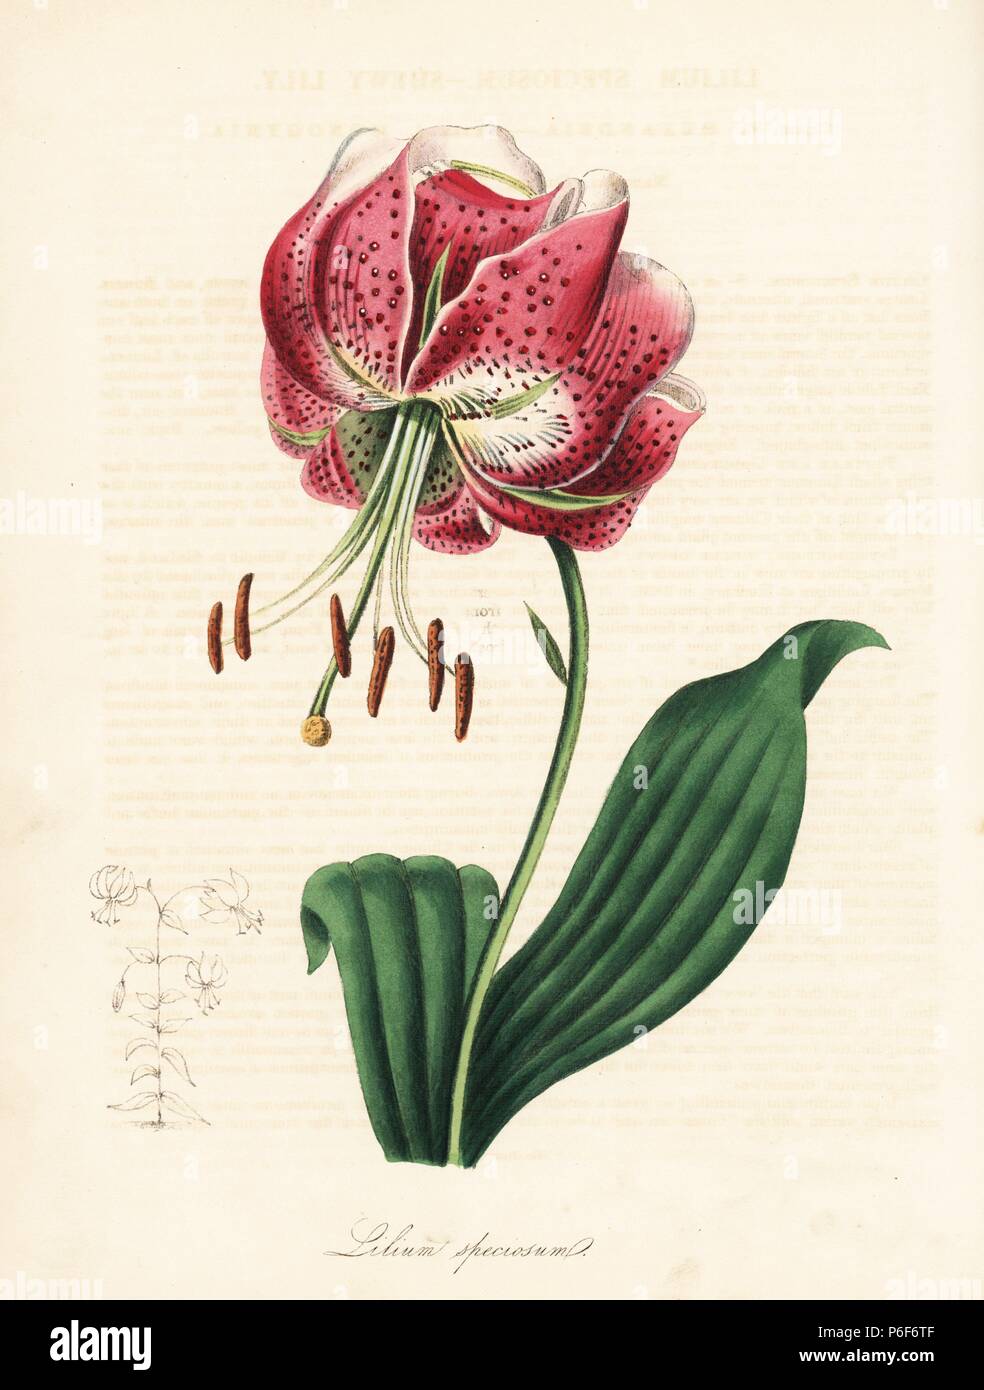 Shewy lily or Japanese lily, Lilium speciosum. Adapted from Mrs. Augusta Withers' illustration in Benjamin Maund's 'The Botanist.' Handcoloured zincograph by C. Chabot drawn by Miss M. A. Burnett from her 'Plantae Utiliores: or Illustrations of Useful Plants,' Whittaker, London, 1842. Miss Burnett drew the botanical illustrations, but the text was chiefly by her late brother, British botanist Gilbert Thomas Burnett (1800-1835). Stock Photo